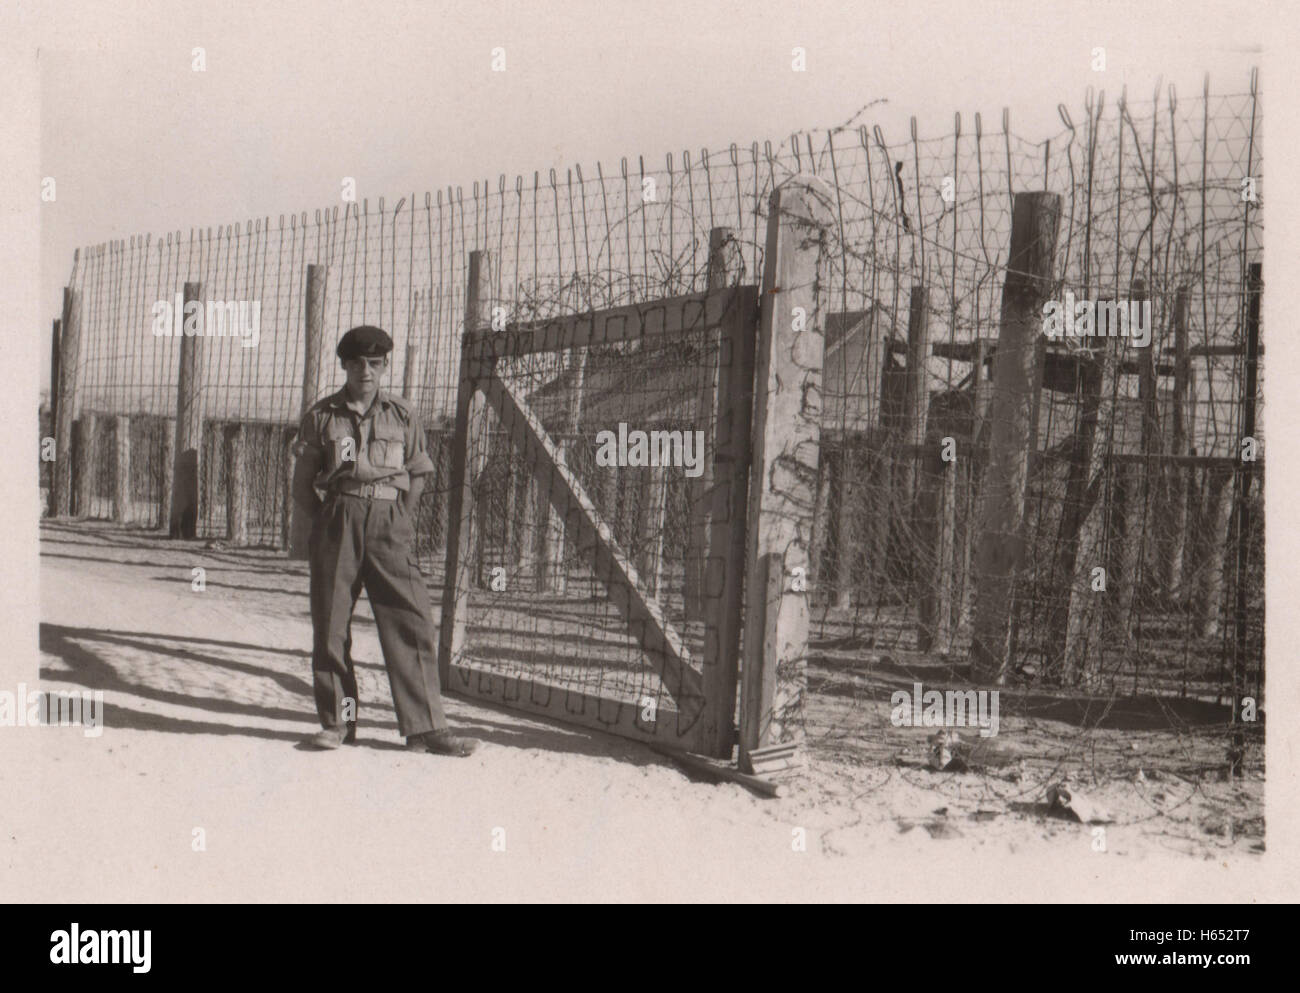 Unidentified British army soldier guarding the Arab labourers entrance at a British army base in the period prior to withdrawal of British troops from the Suez Canal zone and the Suez Crisis.  Location 10 Base Ordnance Depot Royal Army Ordnance Corps (RAOC) camp at Geneifa Ismailia area near the Suez Canal 1952. Stock Photo